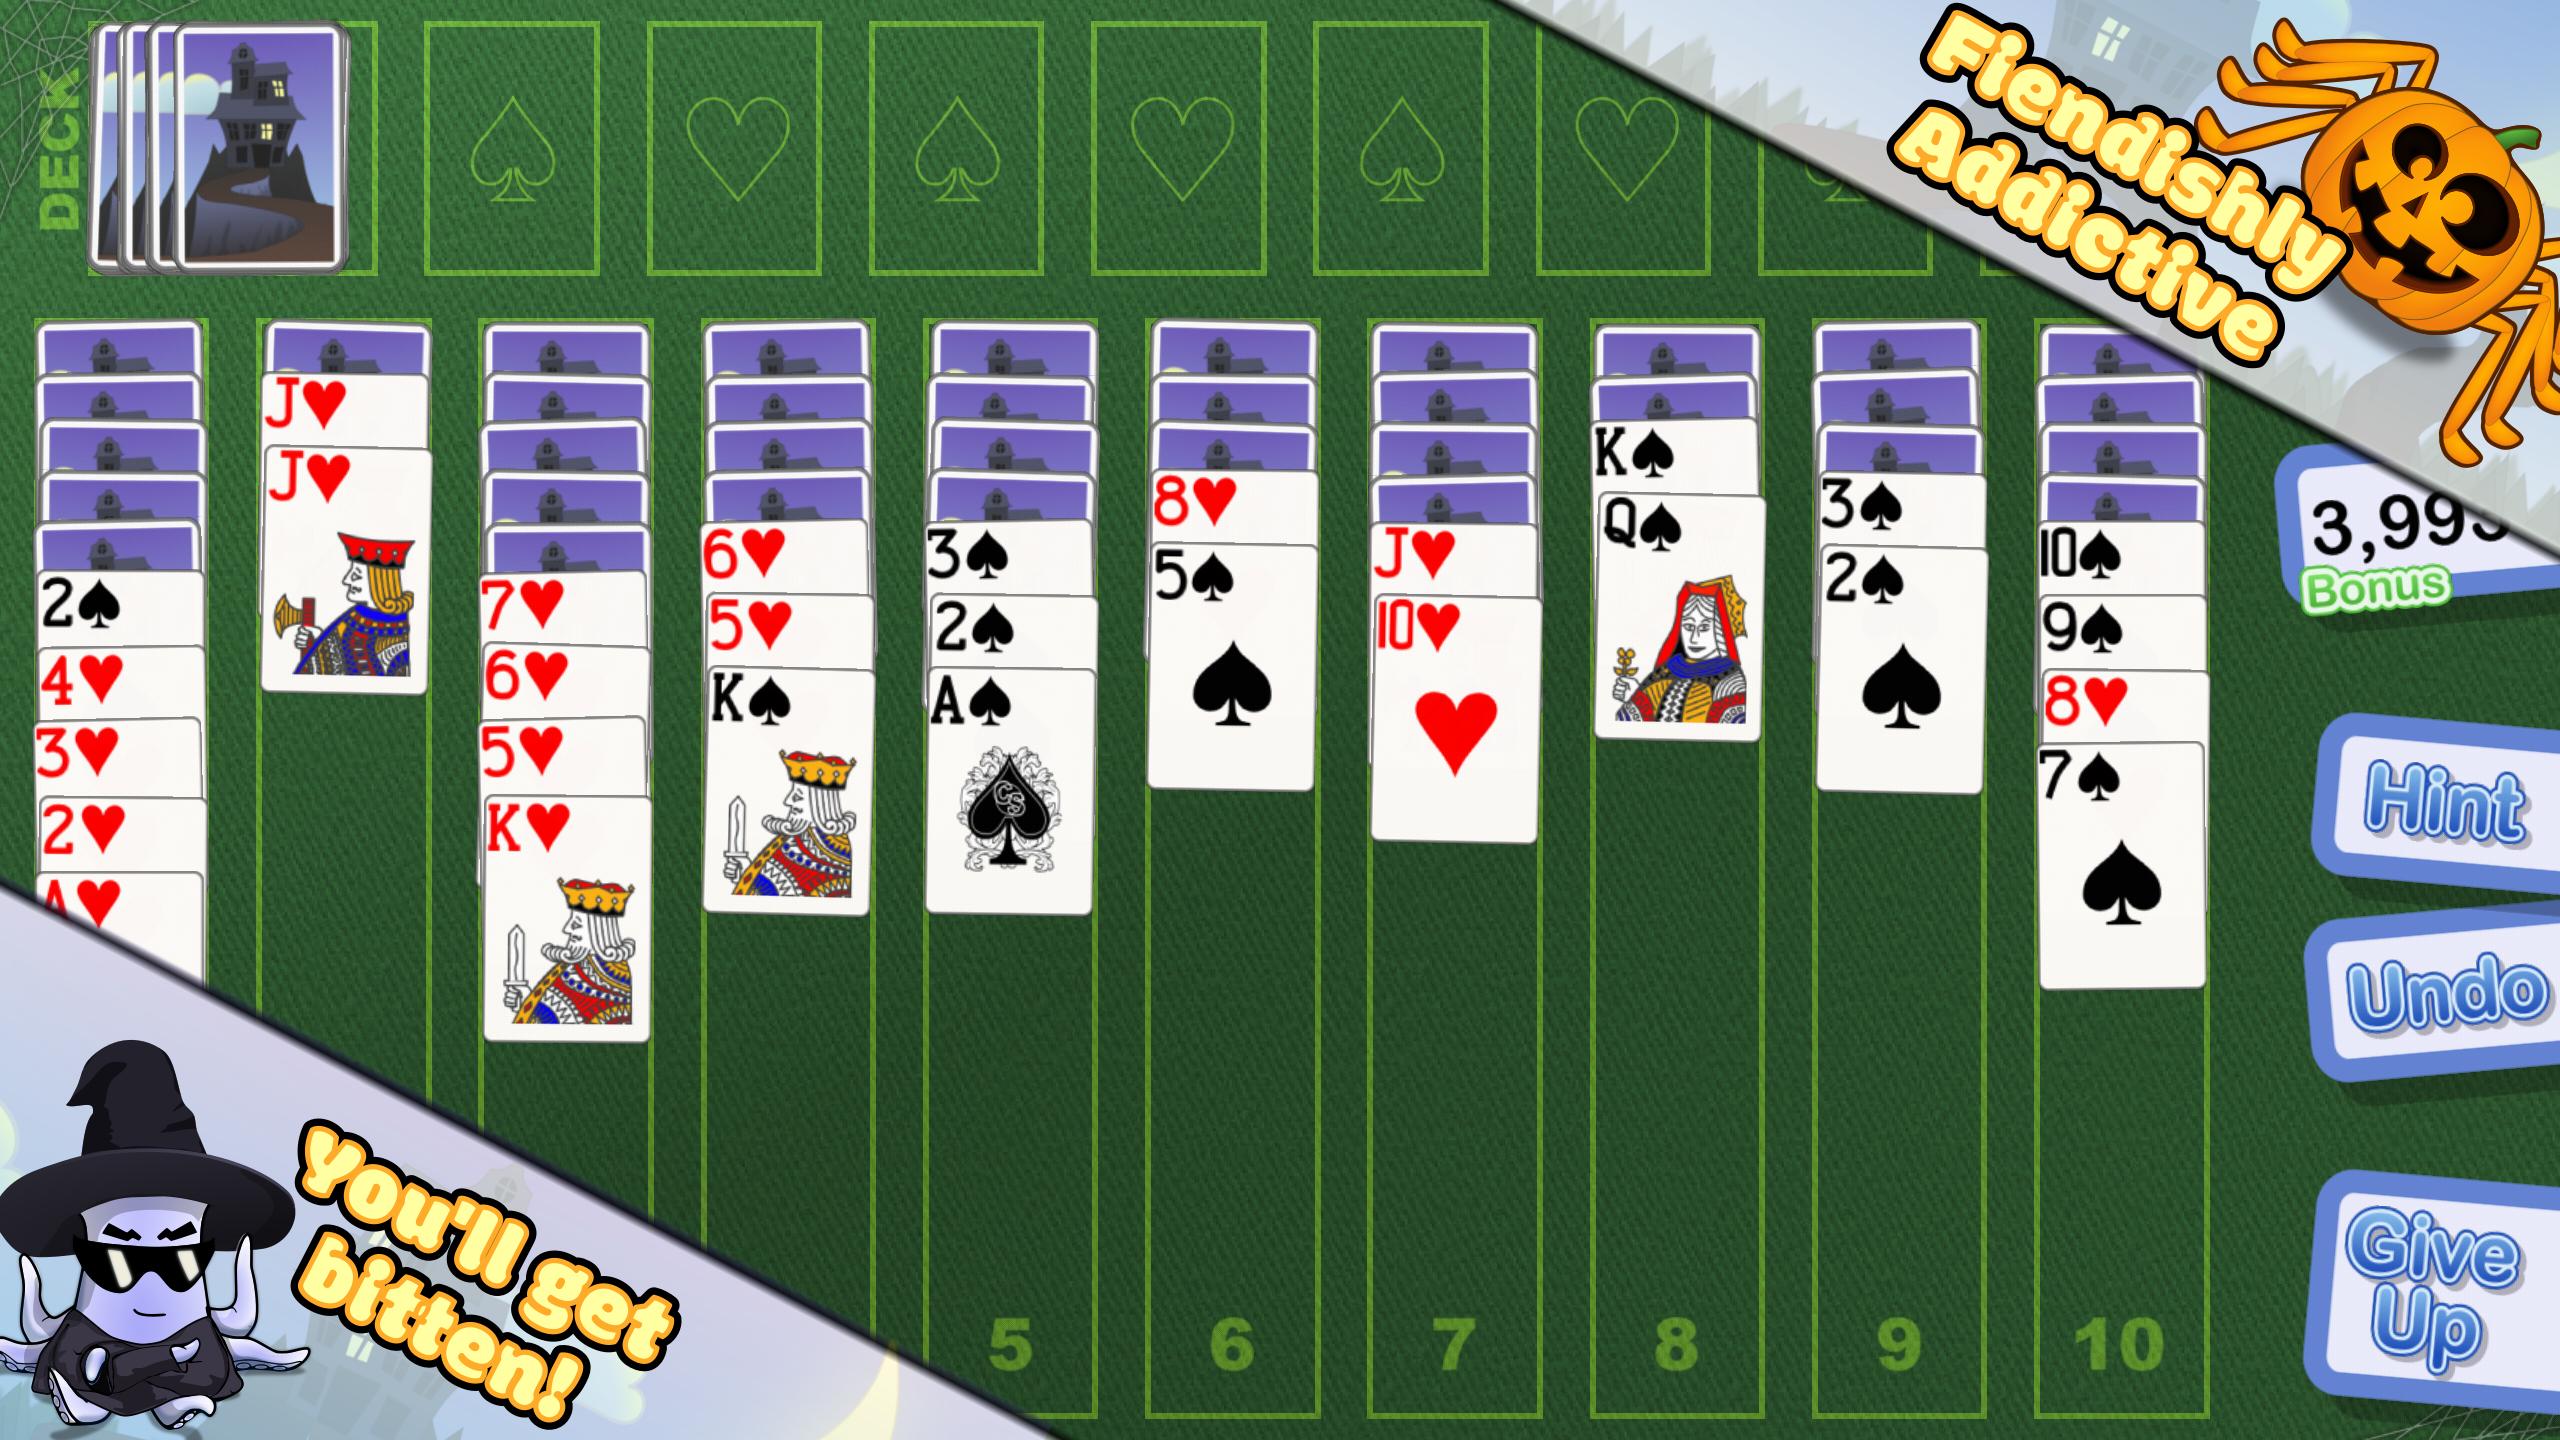 Crystal Spider Solitaire for Android - APK Download